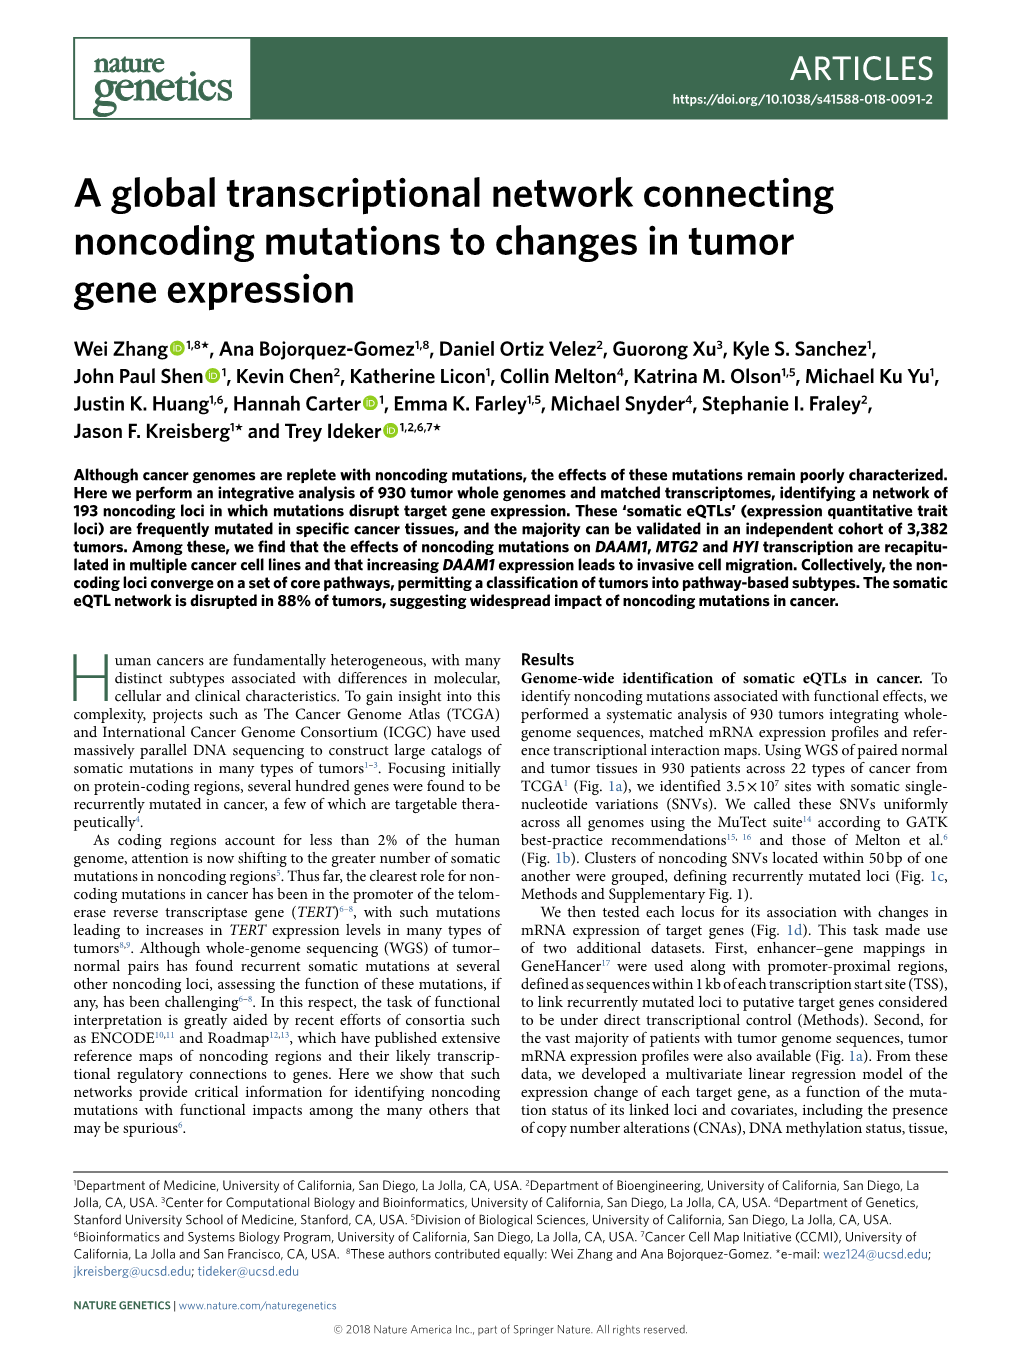 A Global Transcriptional Network Connecting Noncoding Mutations to Changes in Tumor Gene Expression